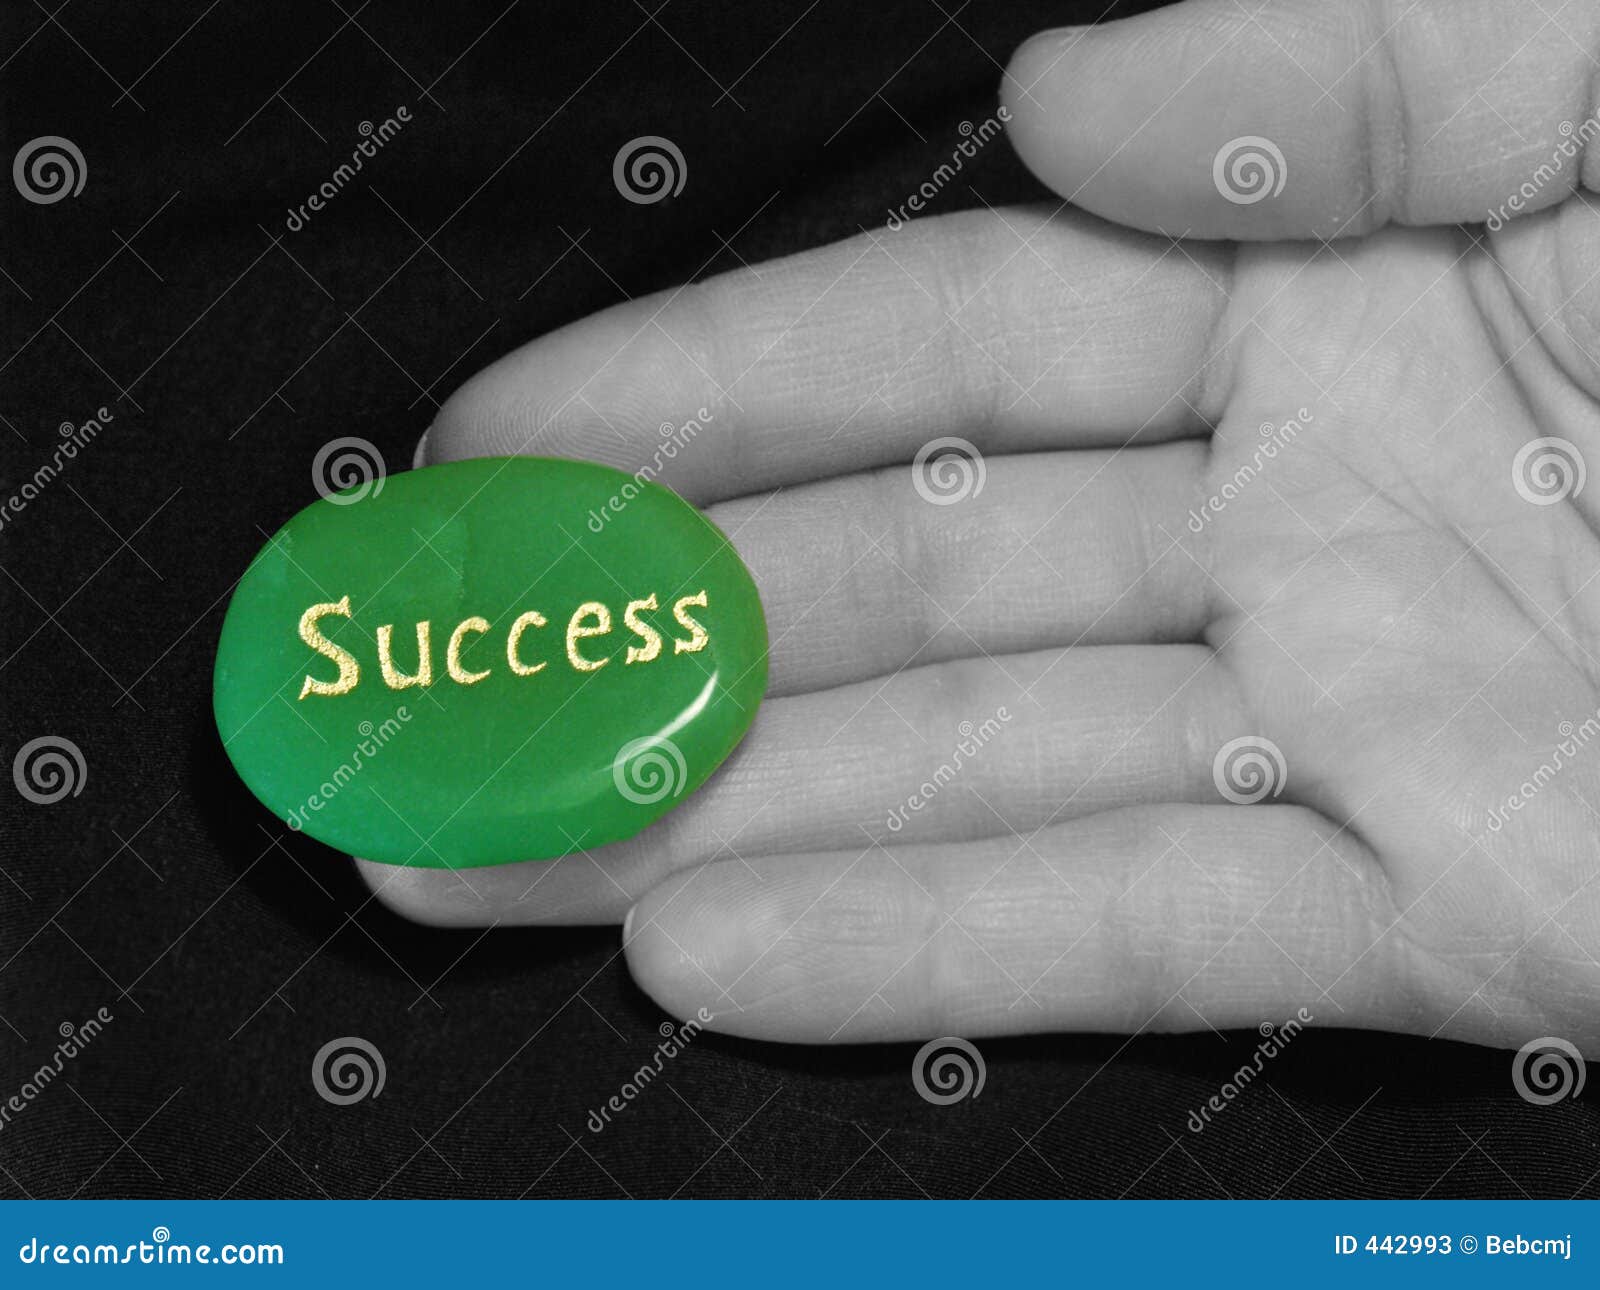 success at your fingertips